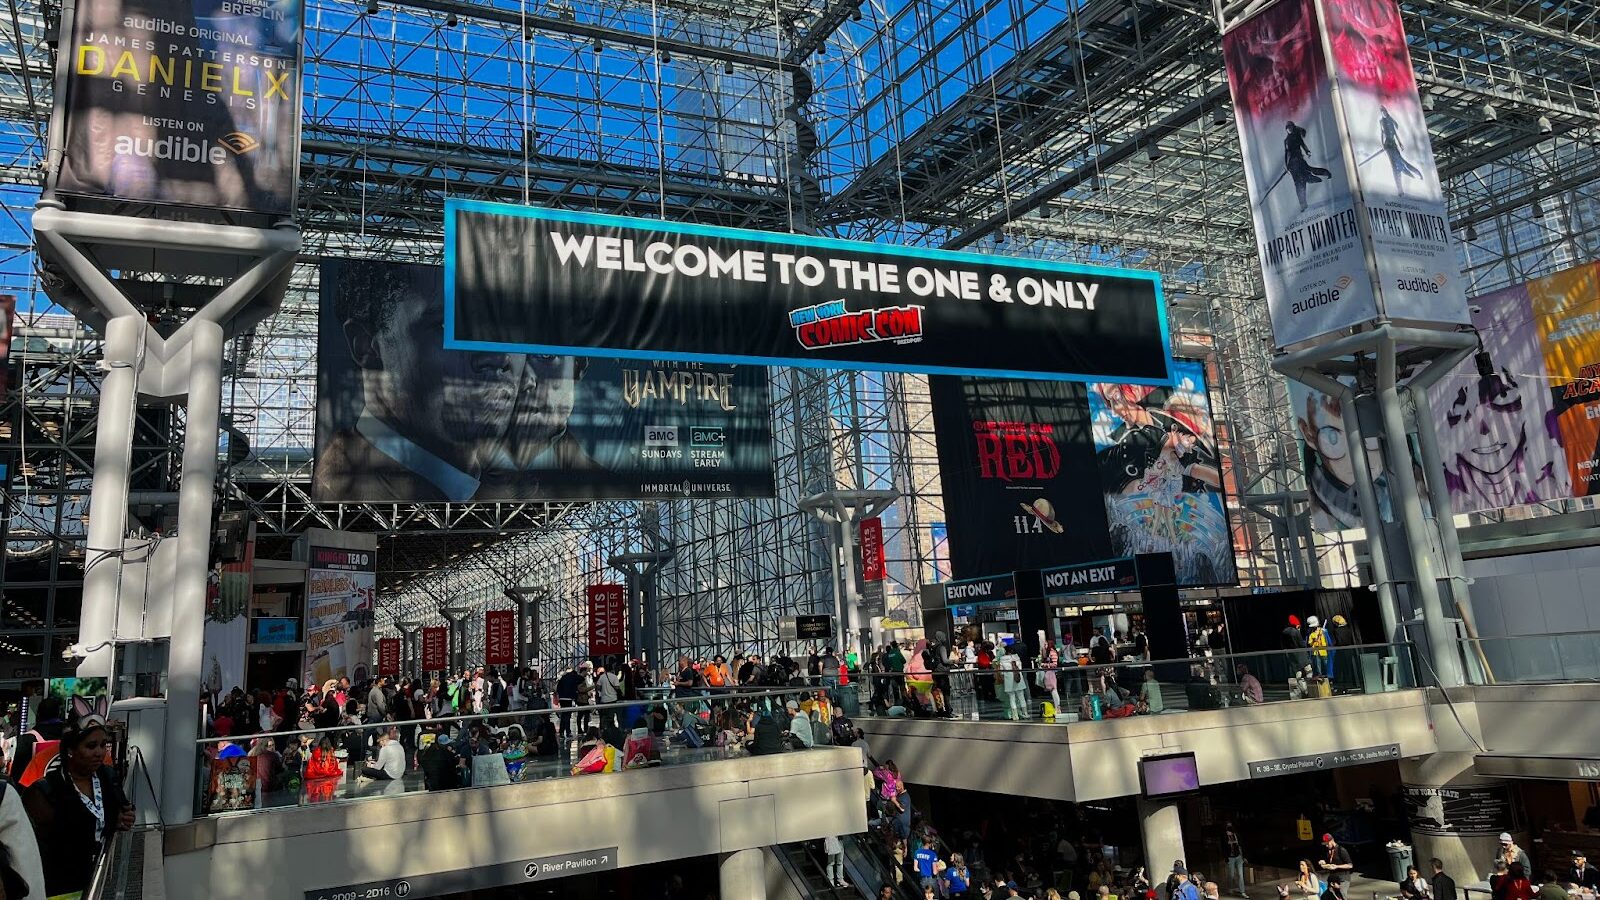 A crowd gathers at New York Comic Con at the Jacob Javits Center with a banner hanging that reads "The one and only"